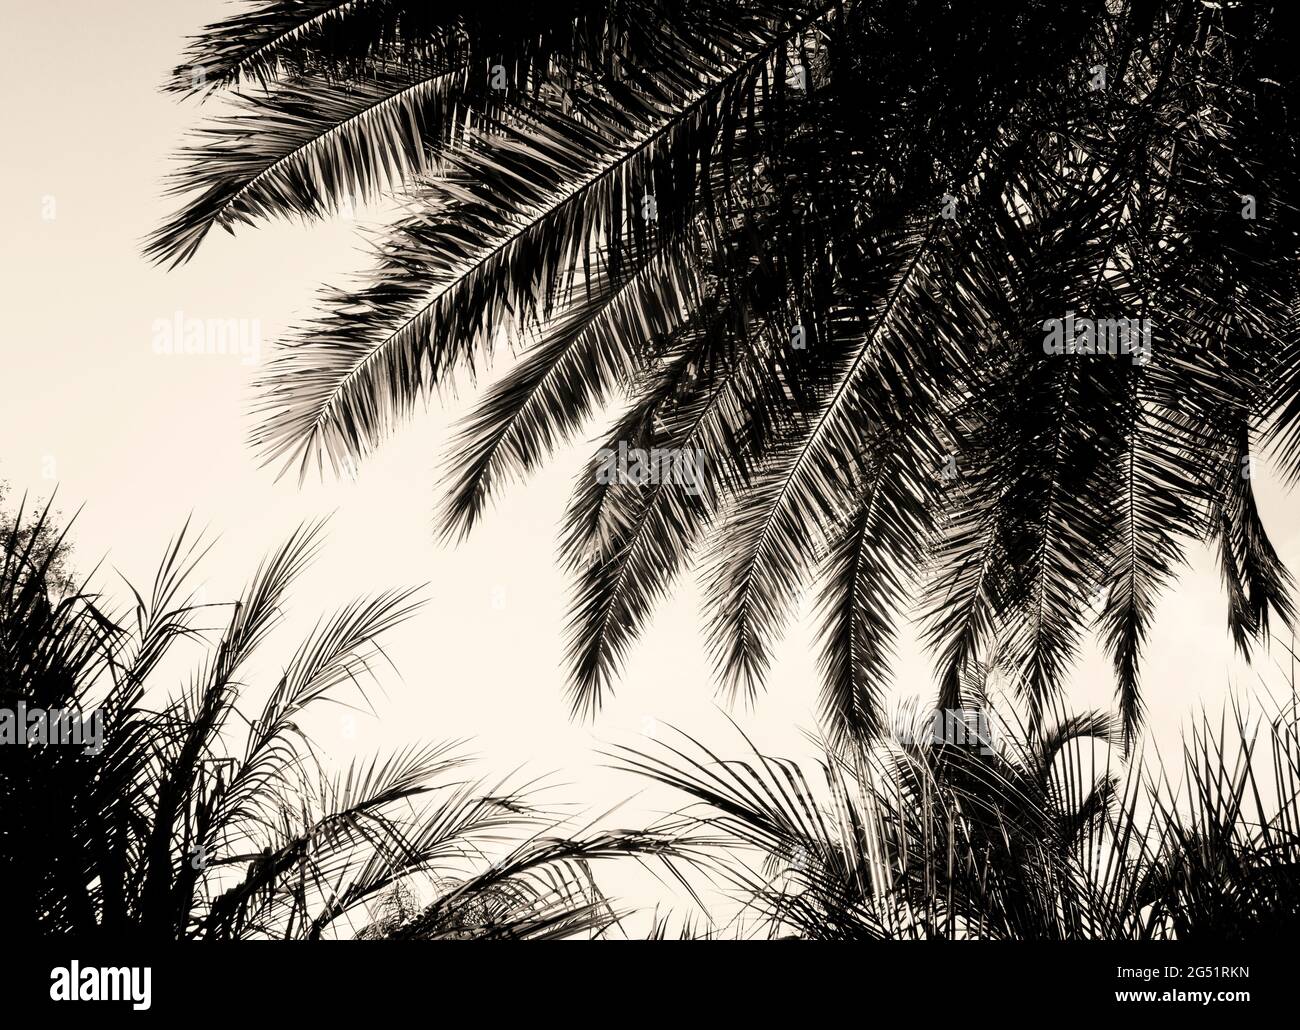 View of palm trees in black and white Stock Photo